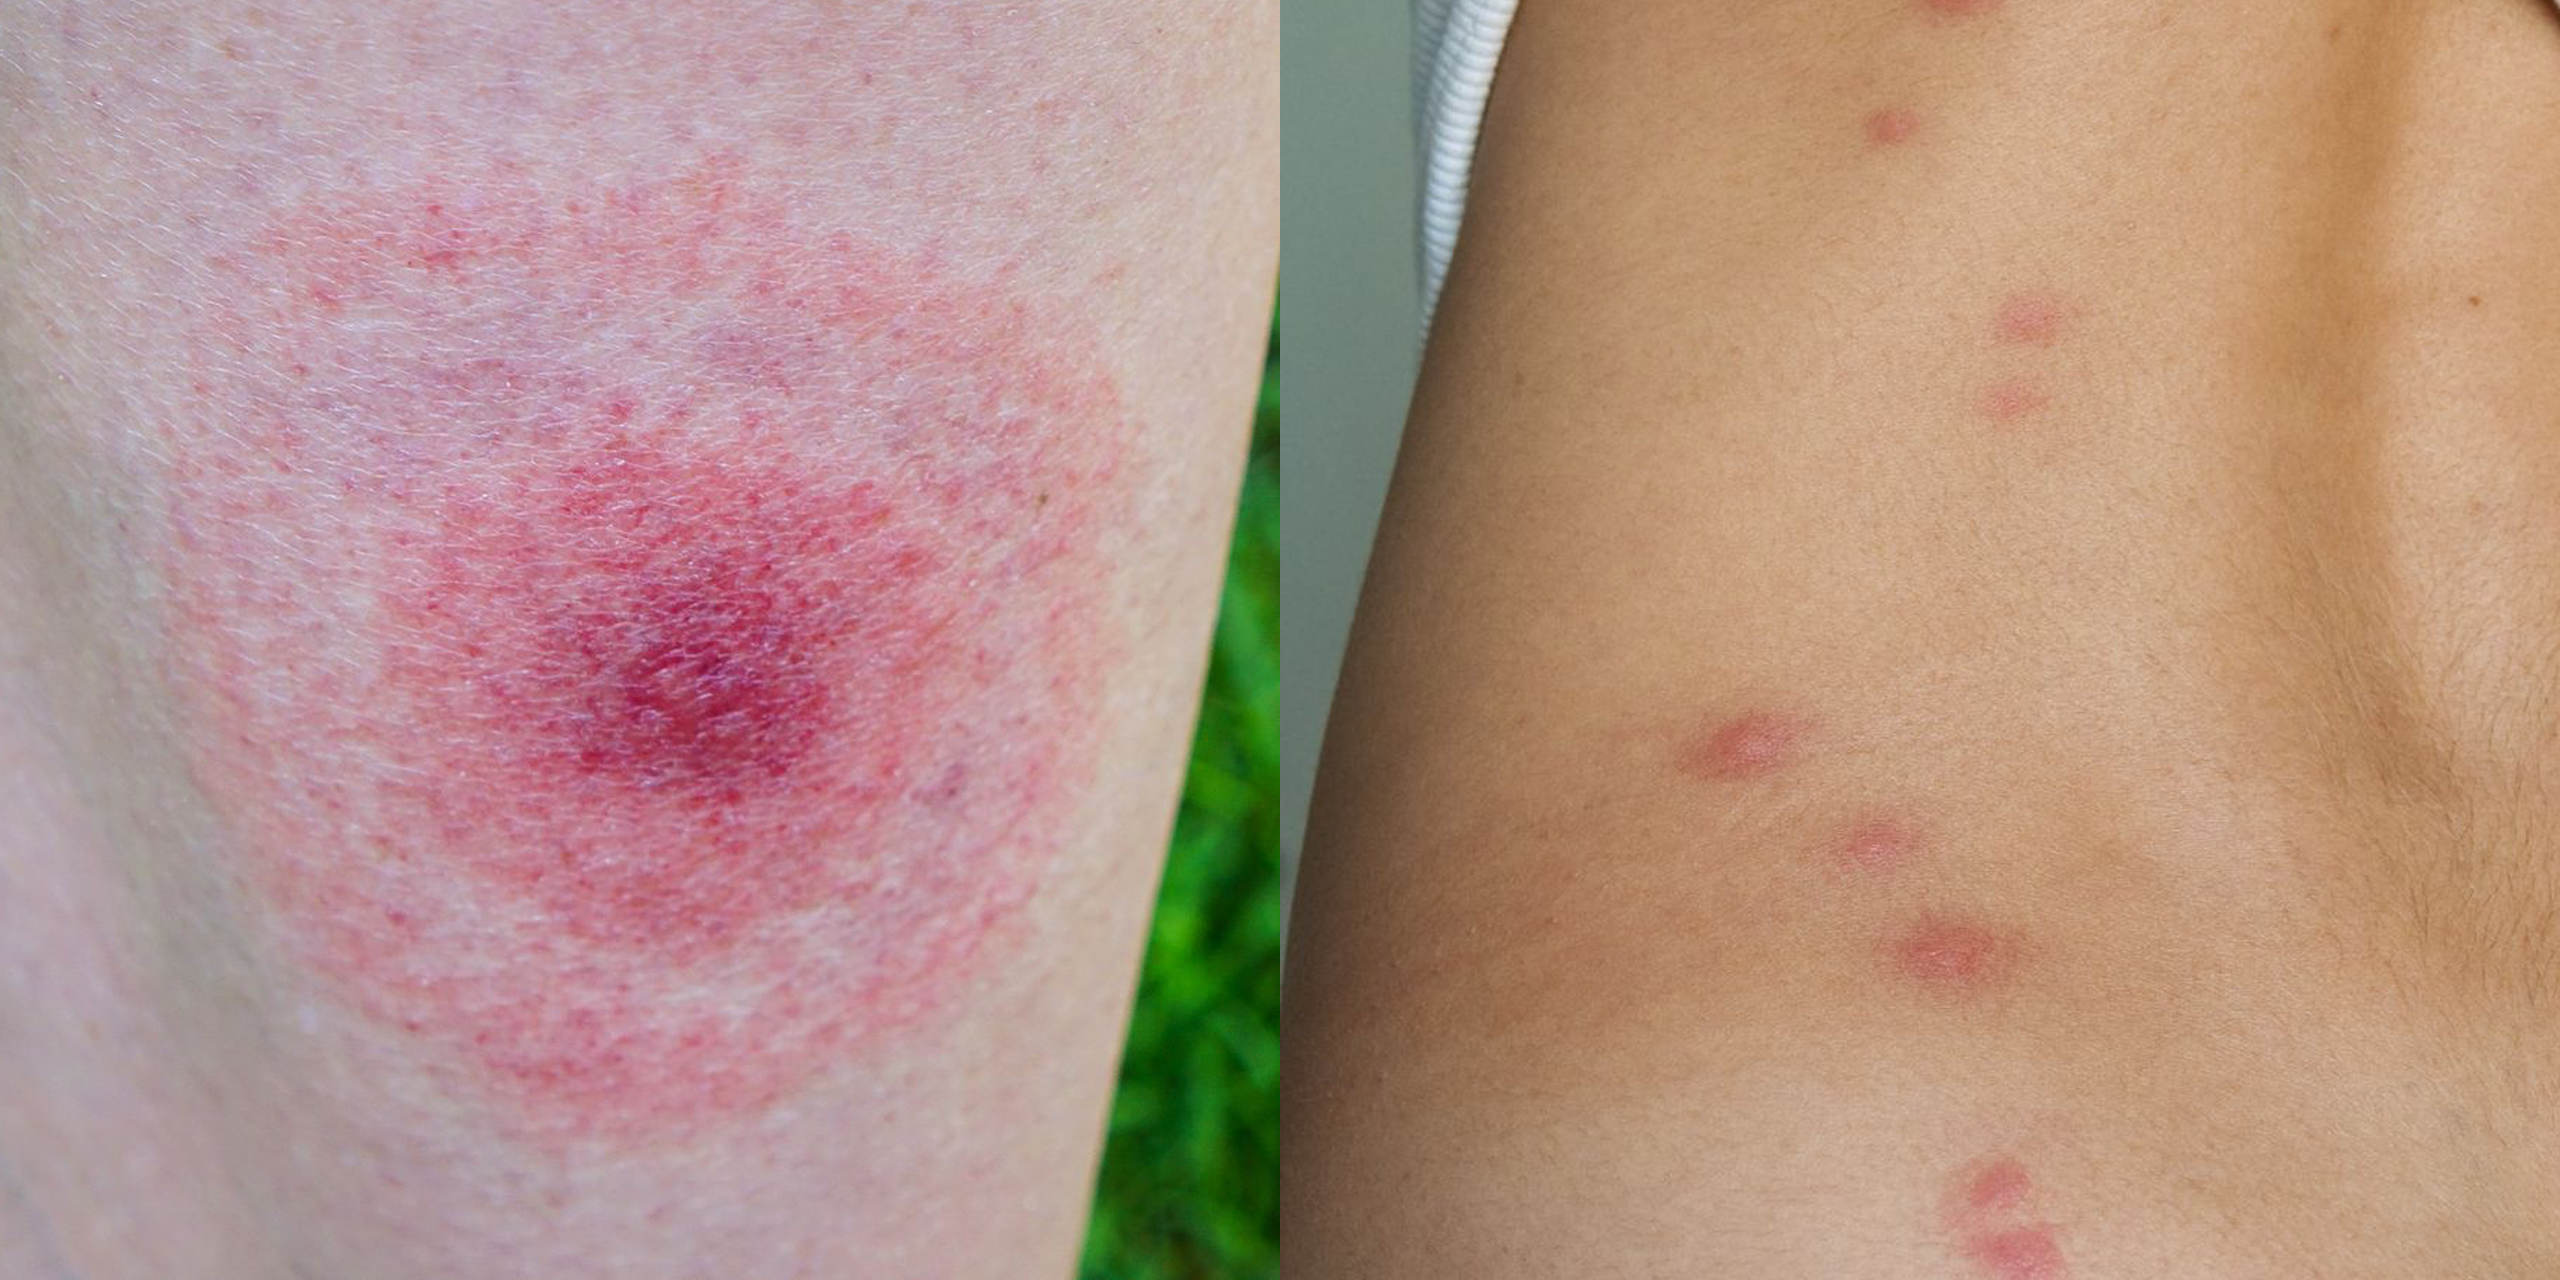 Spider Bite Pictures: Appearance and Emergency Signs